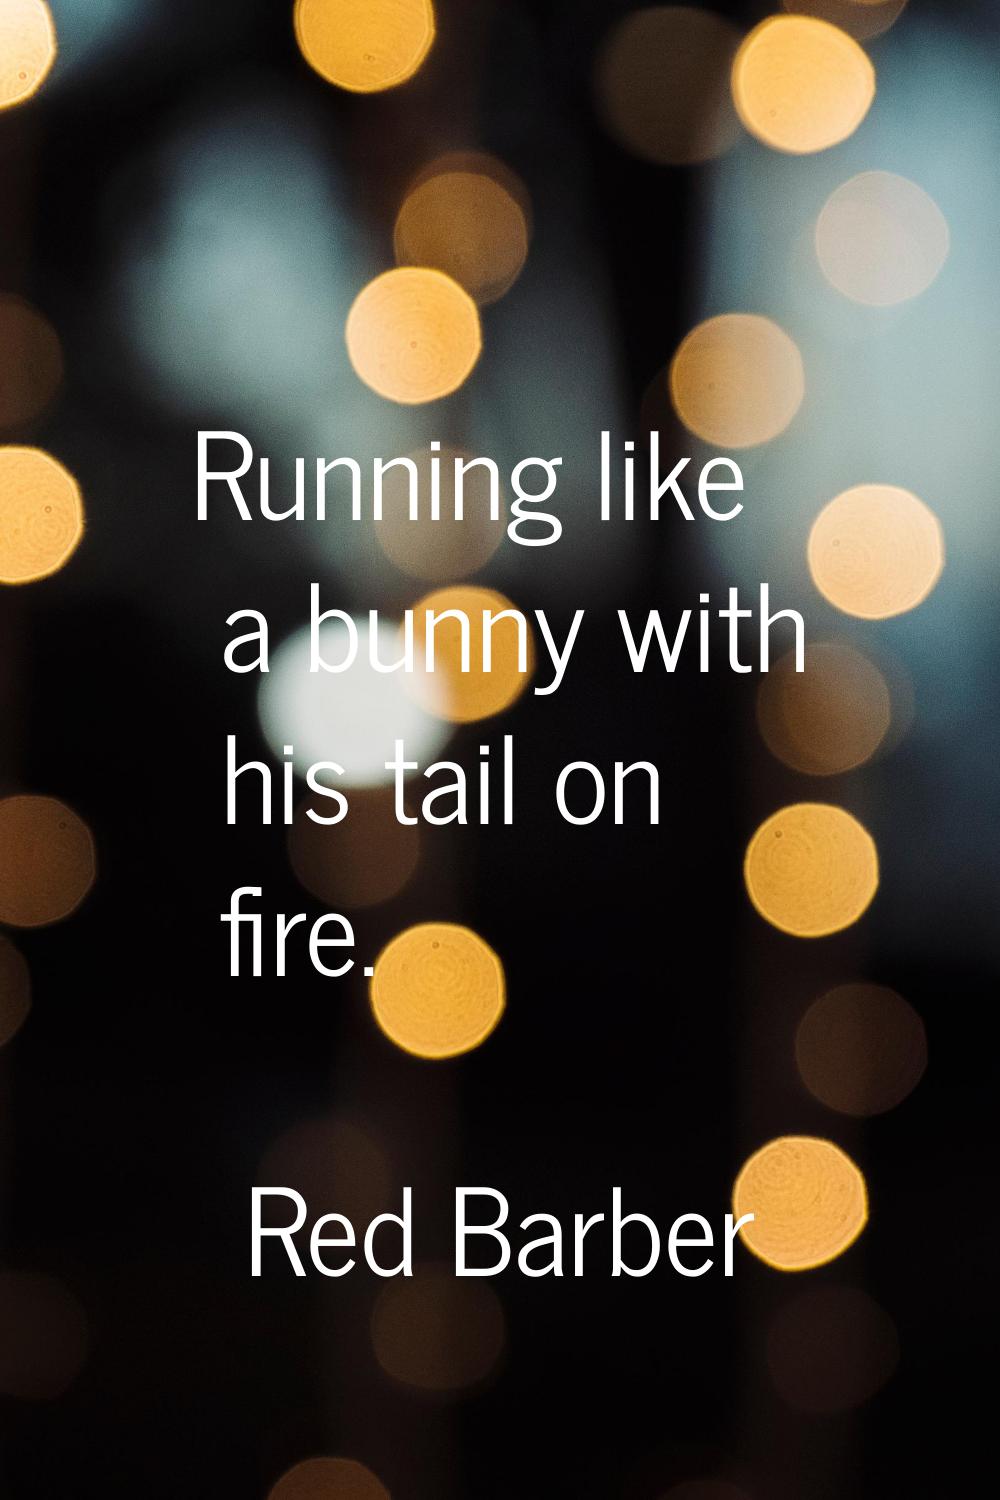 Running like a bunny with his tail on fire.